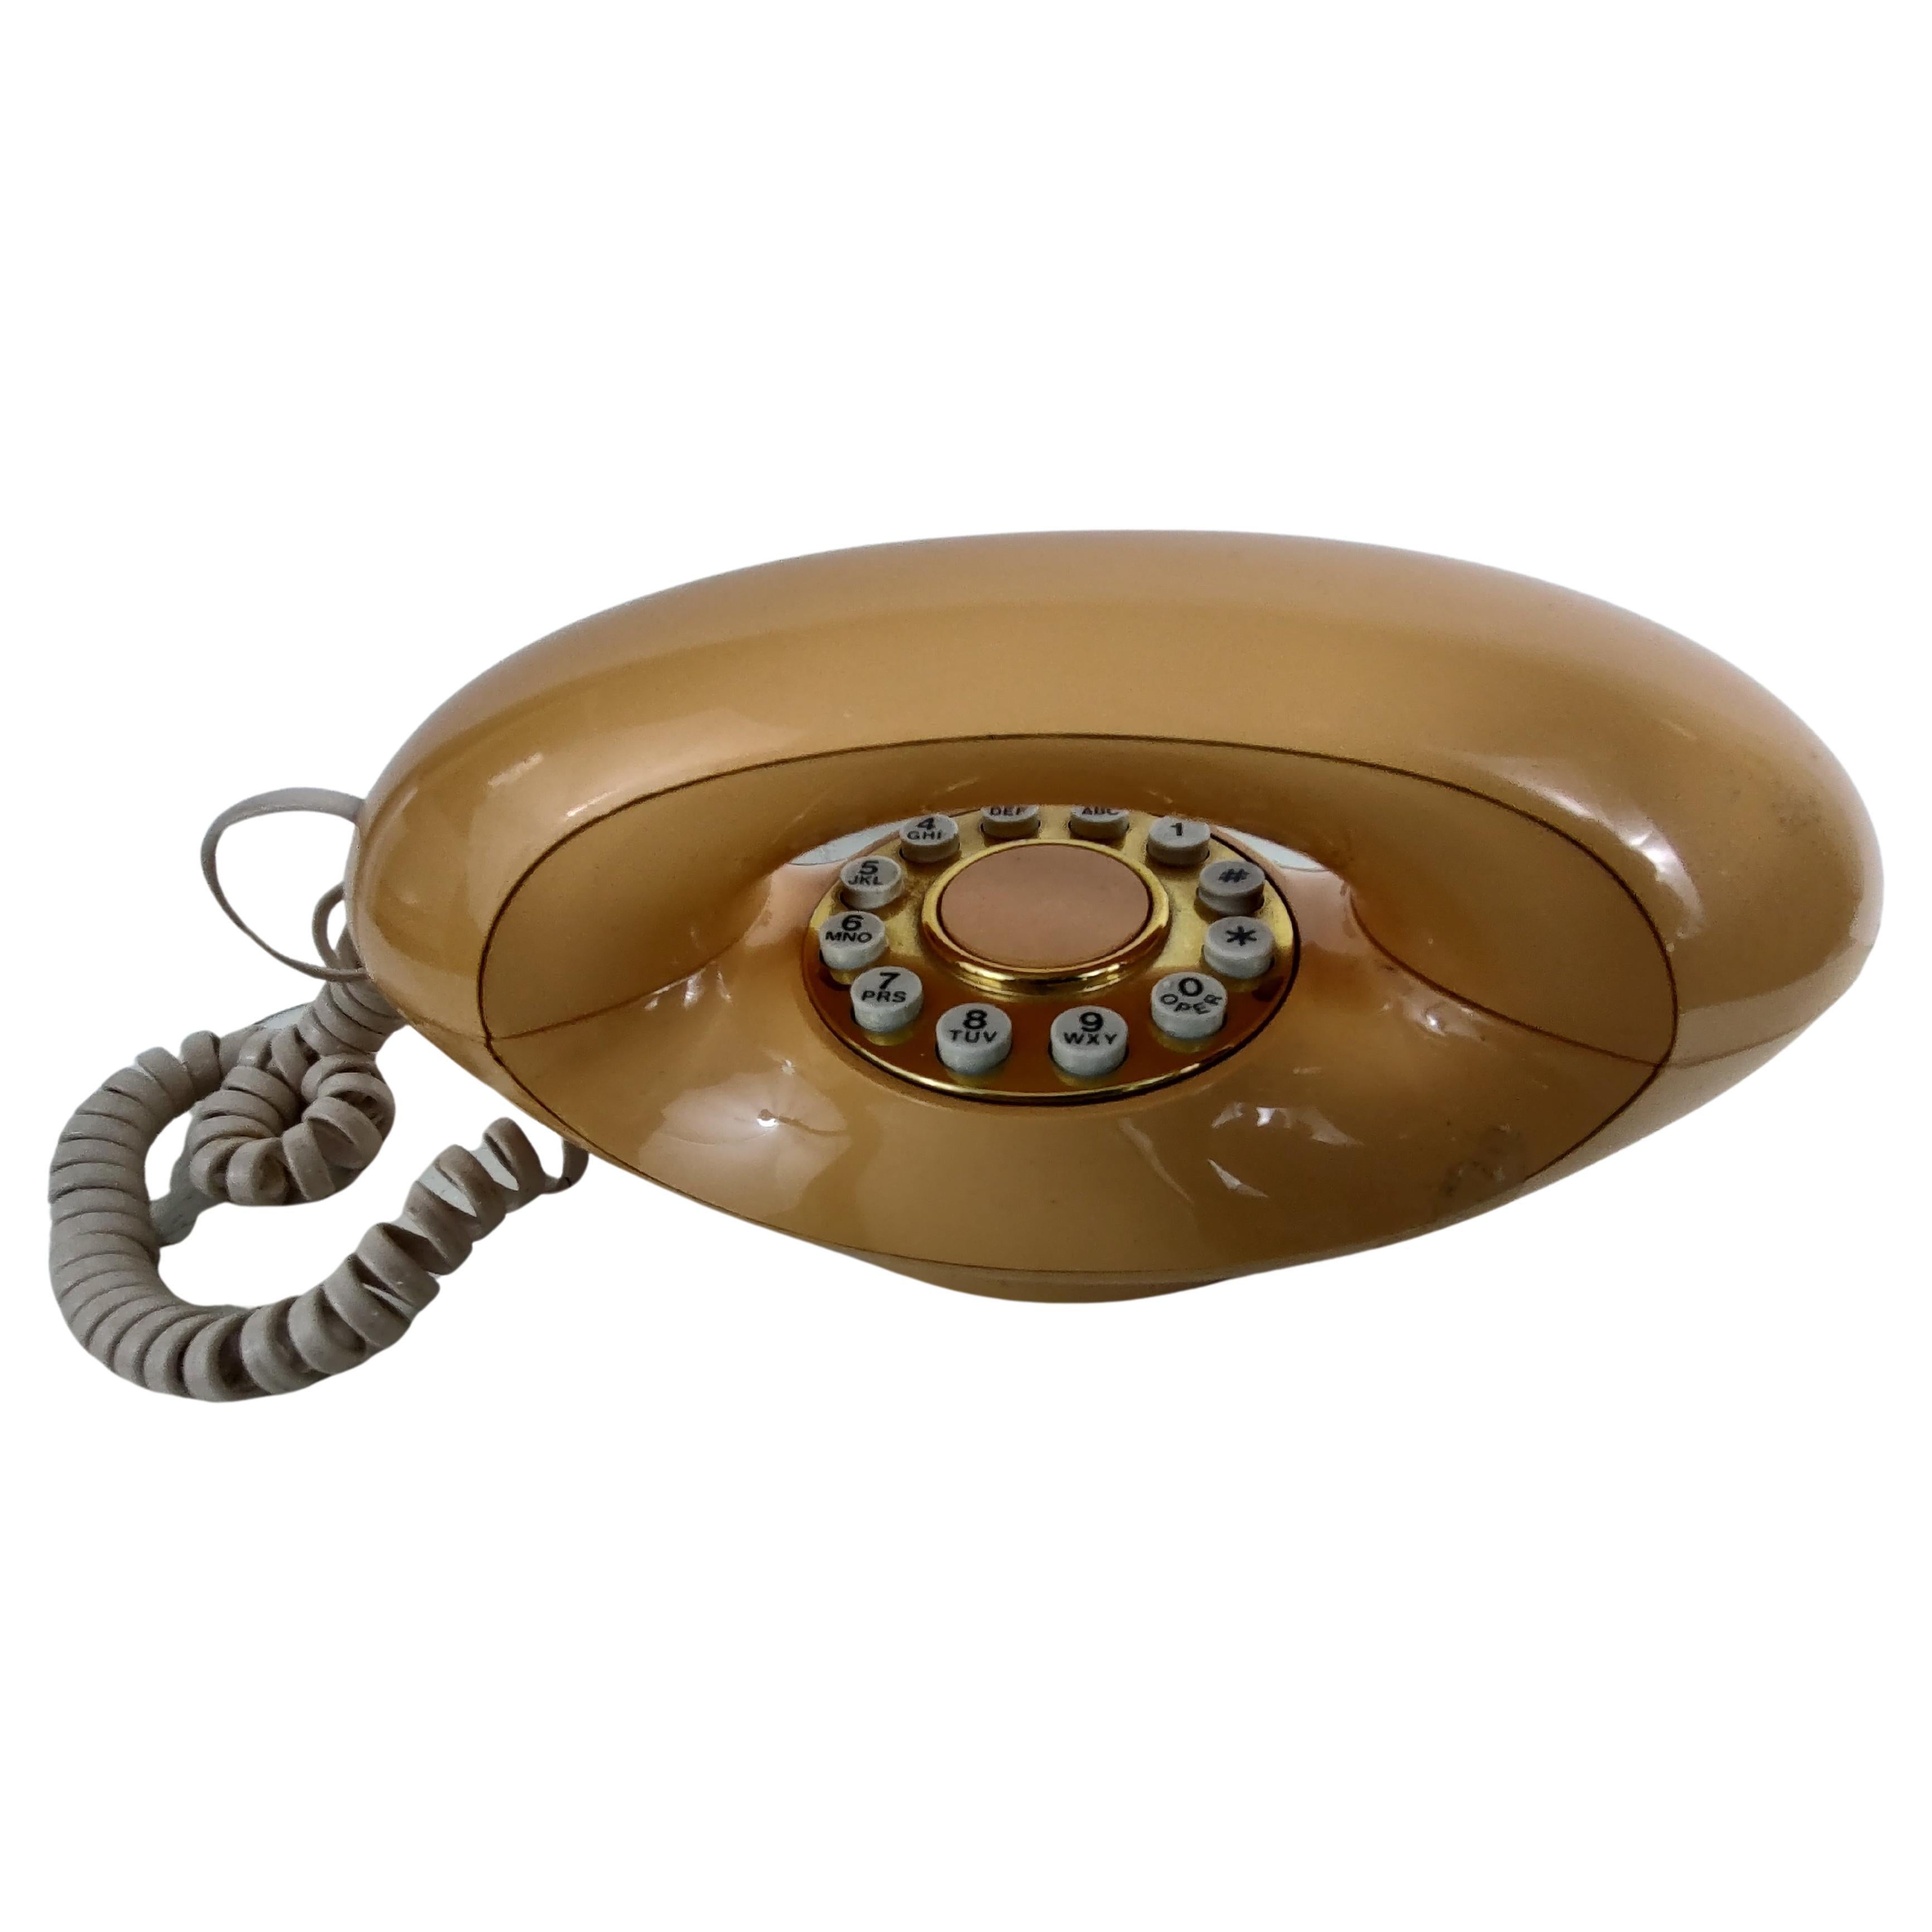 Very sleek & cool styling in this Genie telephone. In excellent vintage condition with minimal wear retains the great color of it's early days. Not tested.